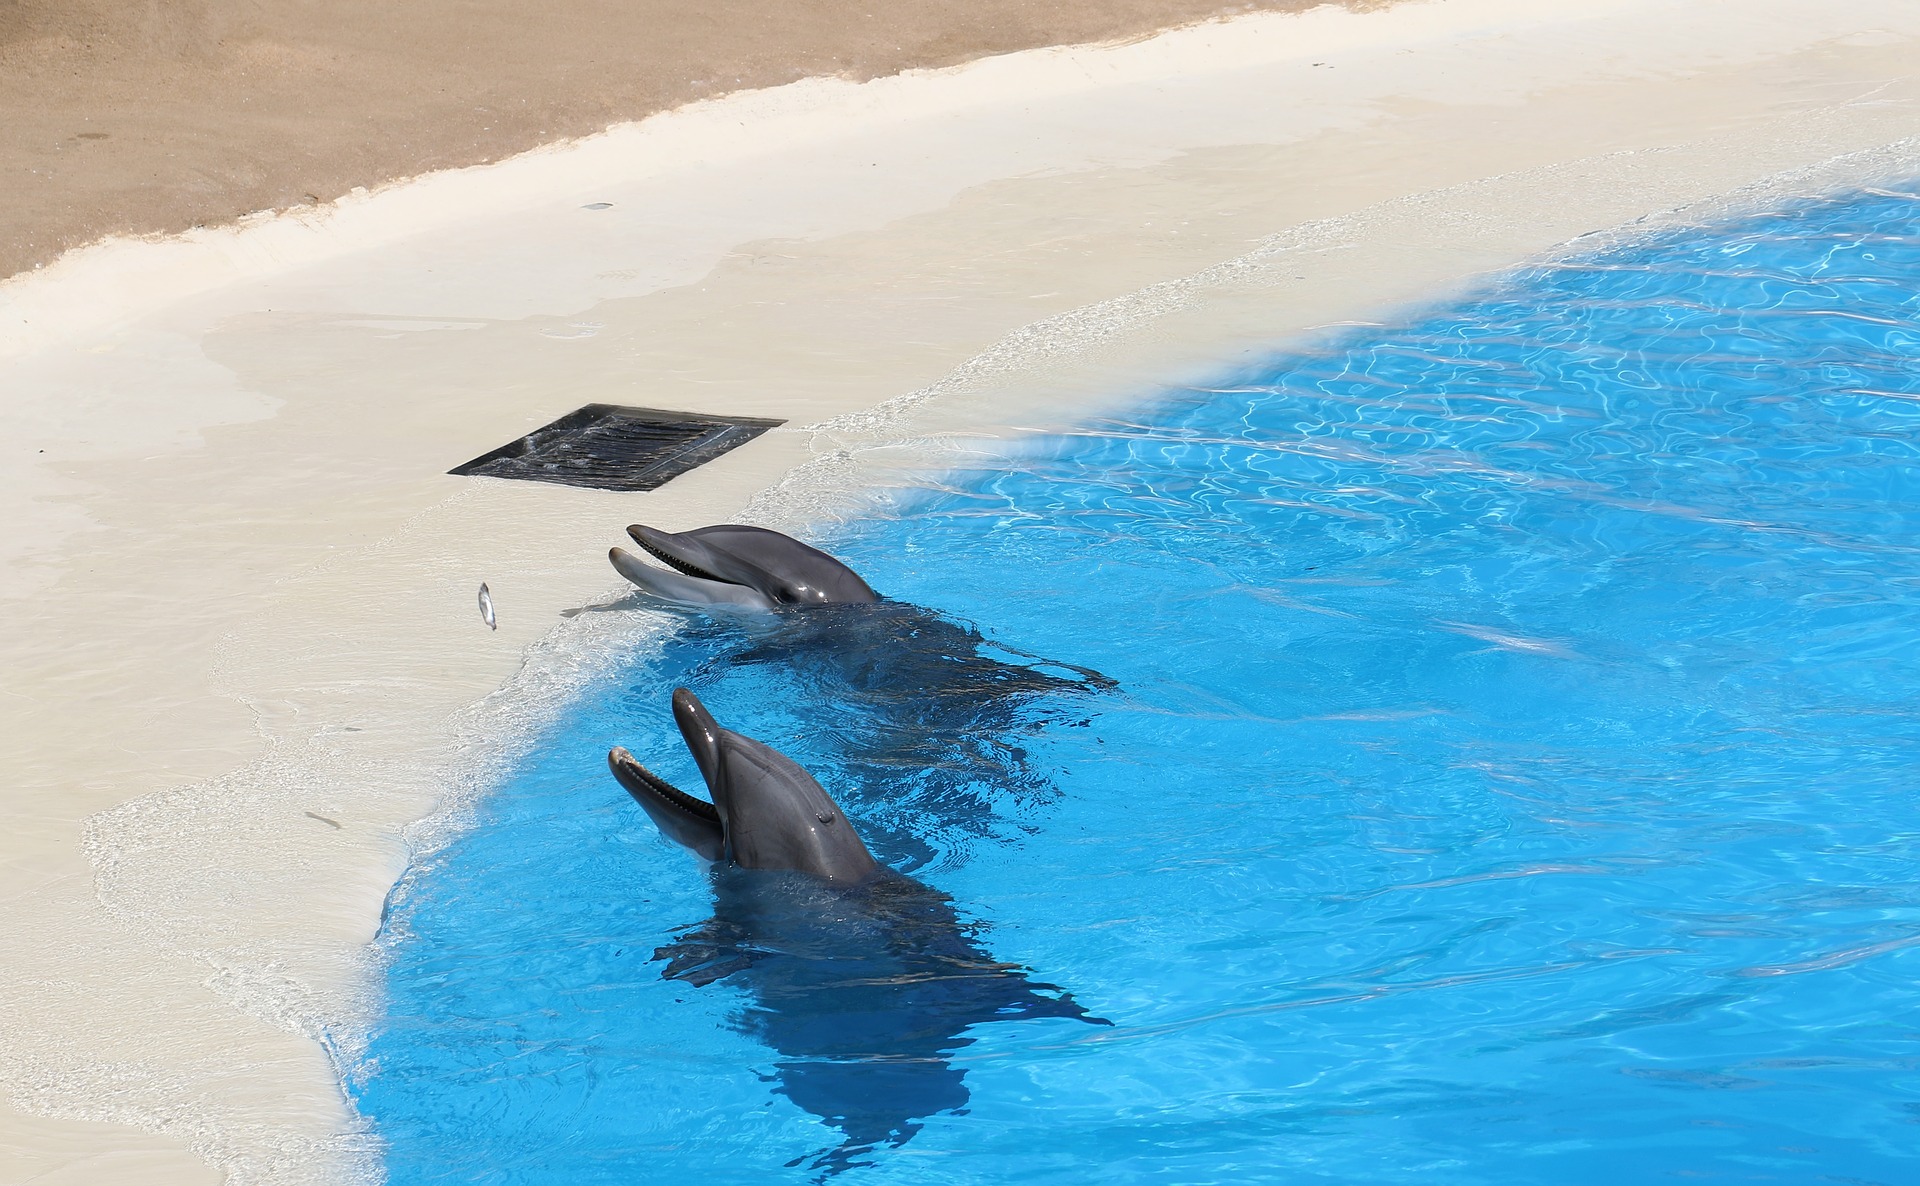 Dolphins at a dolphinarium: stress in captive dolphins